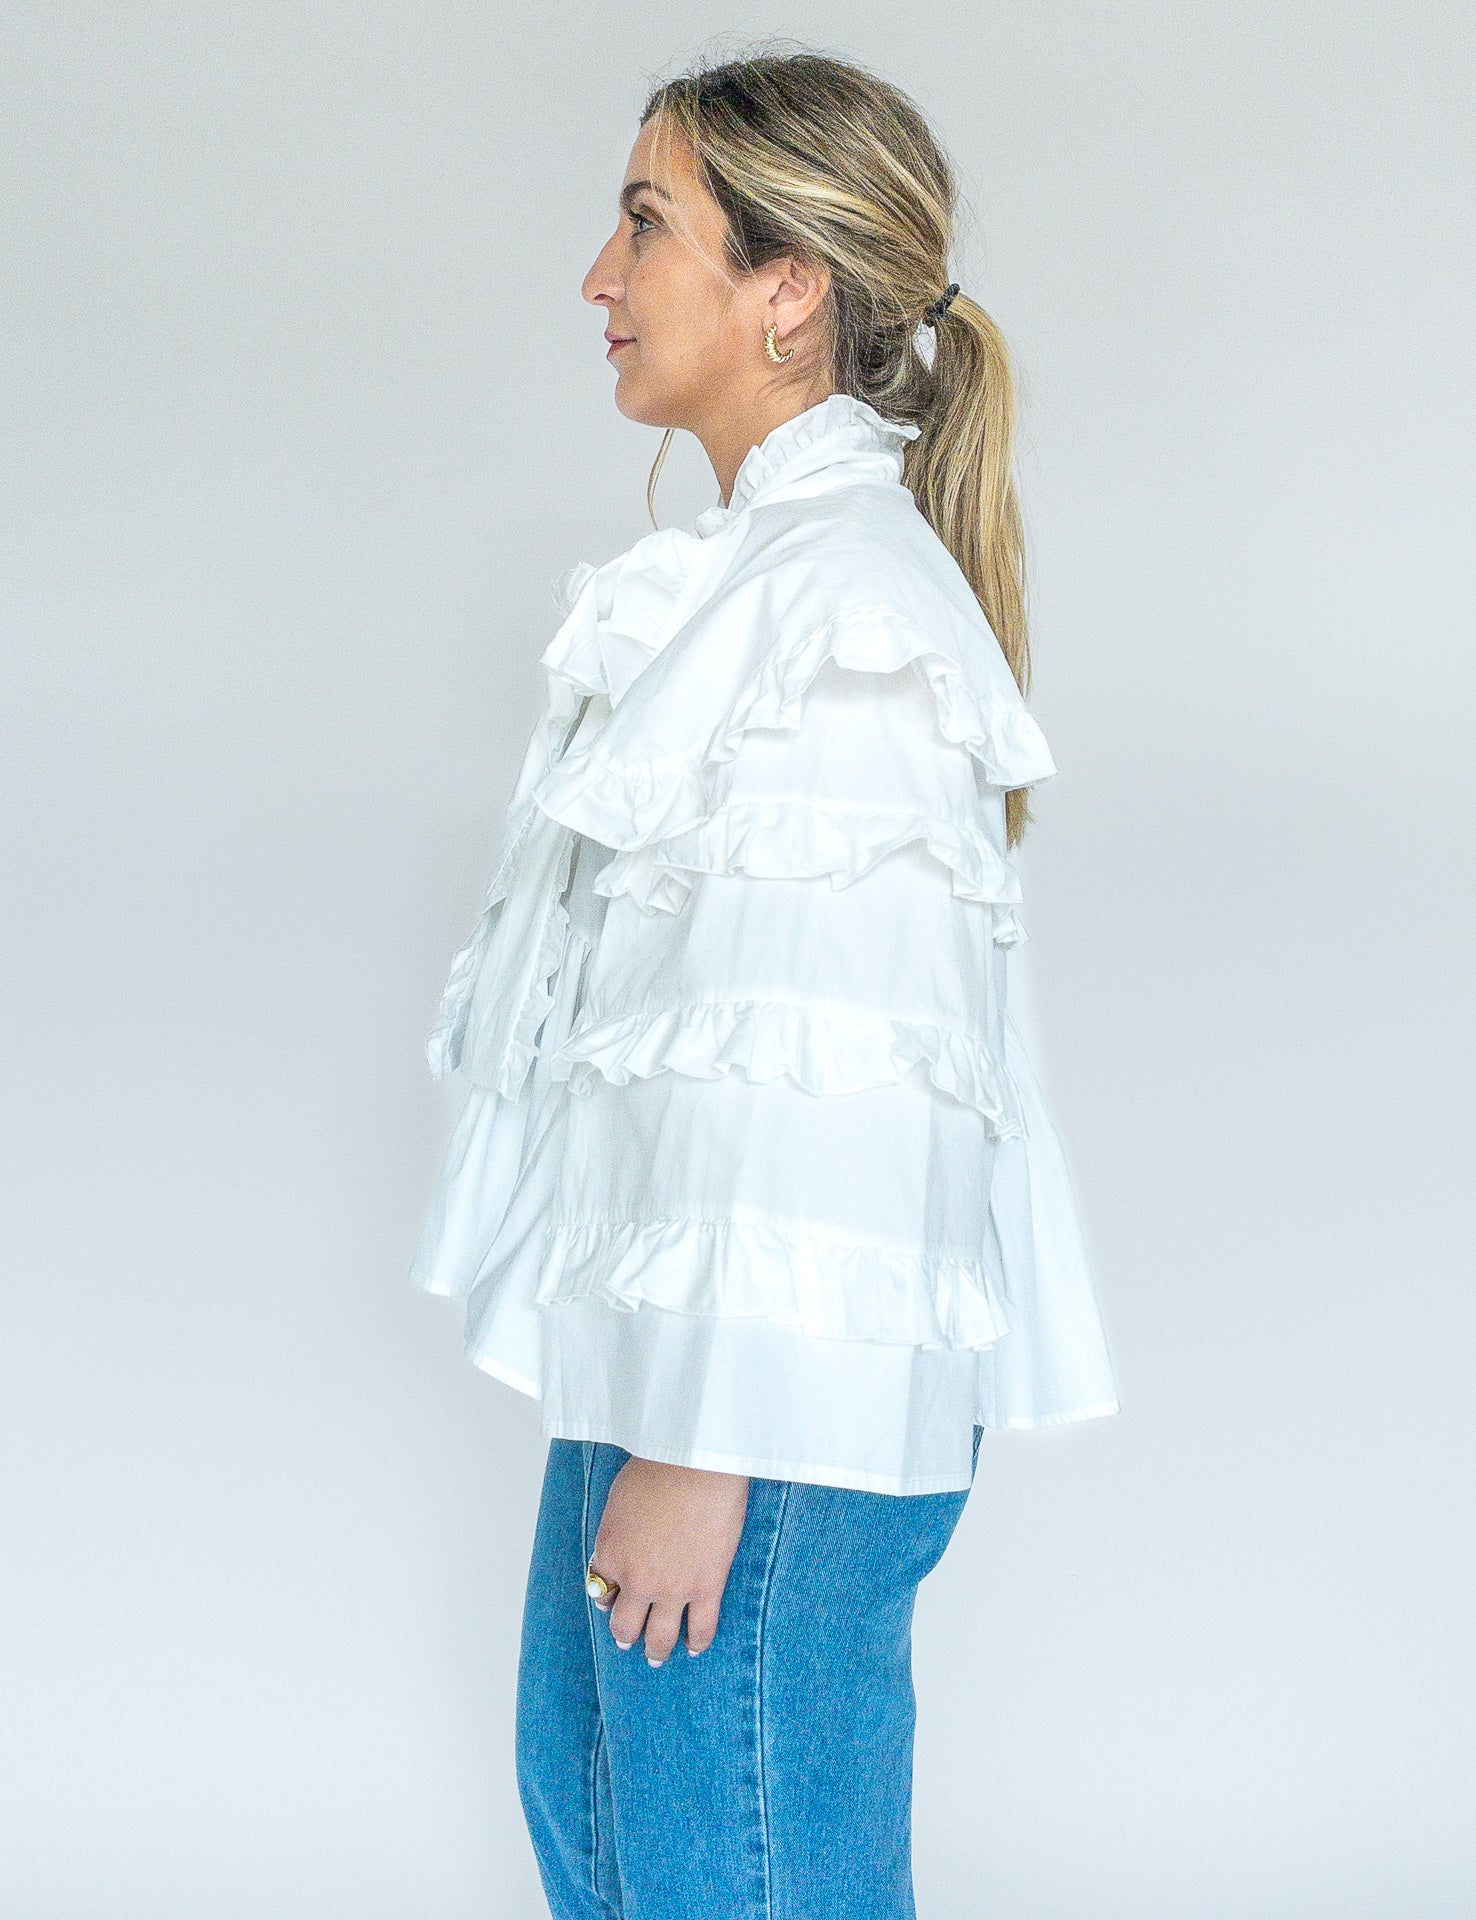 sister jane, metropolis bow ruffle blouse, white, women&#39;s blouse, spanish blouse, bow blouse, fashion, apparel, ethically made, curate, shopthecurate